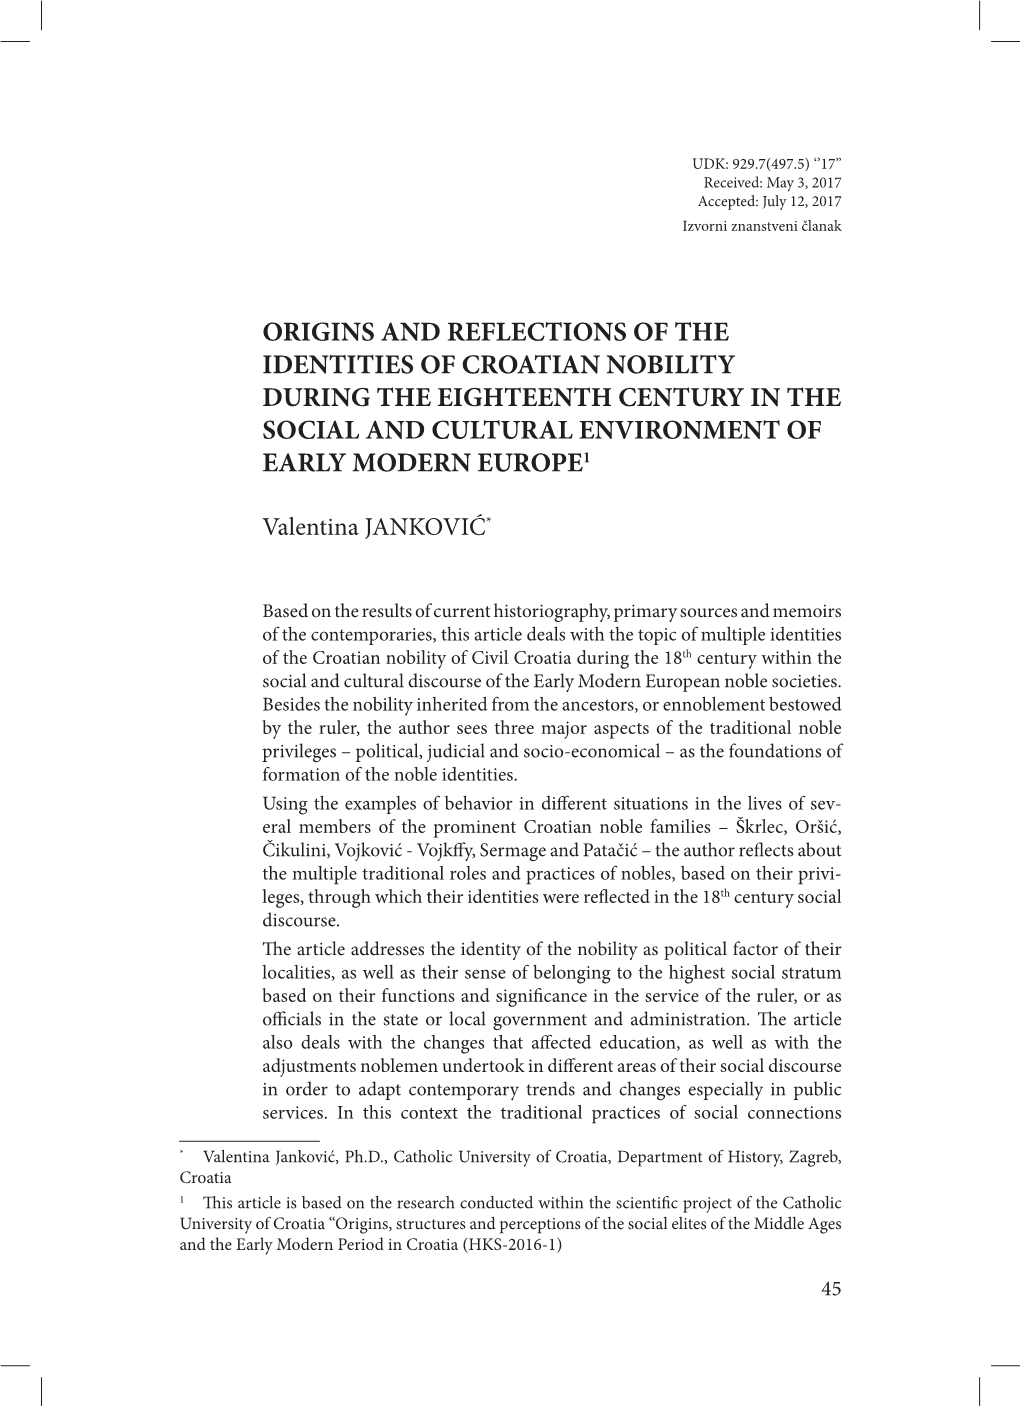 Origins and Reflections of the Identities of Croatian Nobility During the Eighteenth Century in the Social and Cultural Environment of Early Modern Europe1